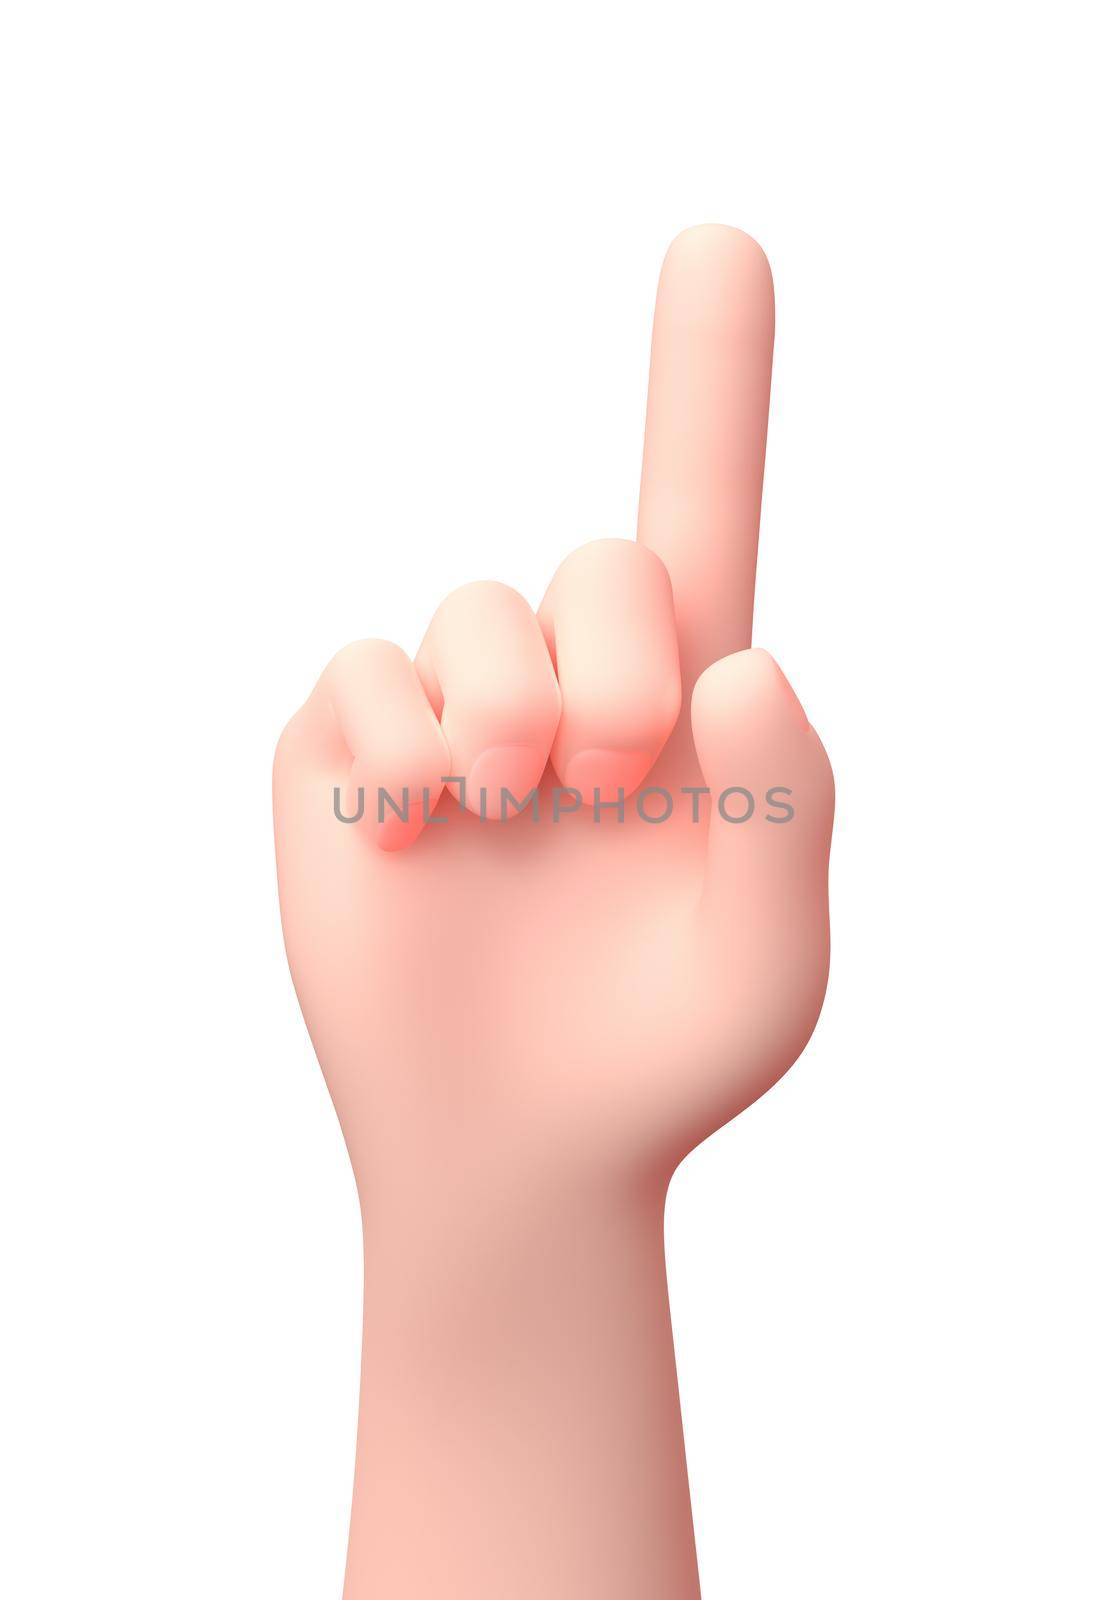 One Finger Raised Hand. 3D Cartoon Character. Isolated on White Background 3D Illustration, Number 1 Concept